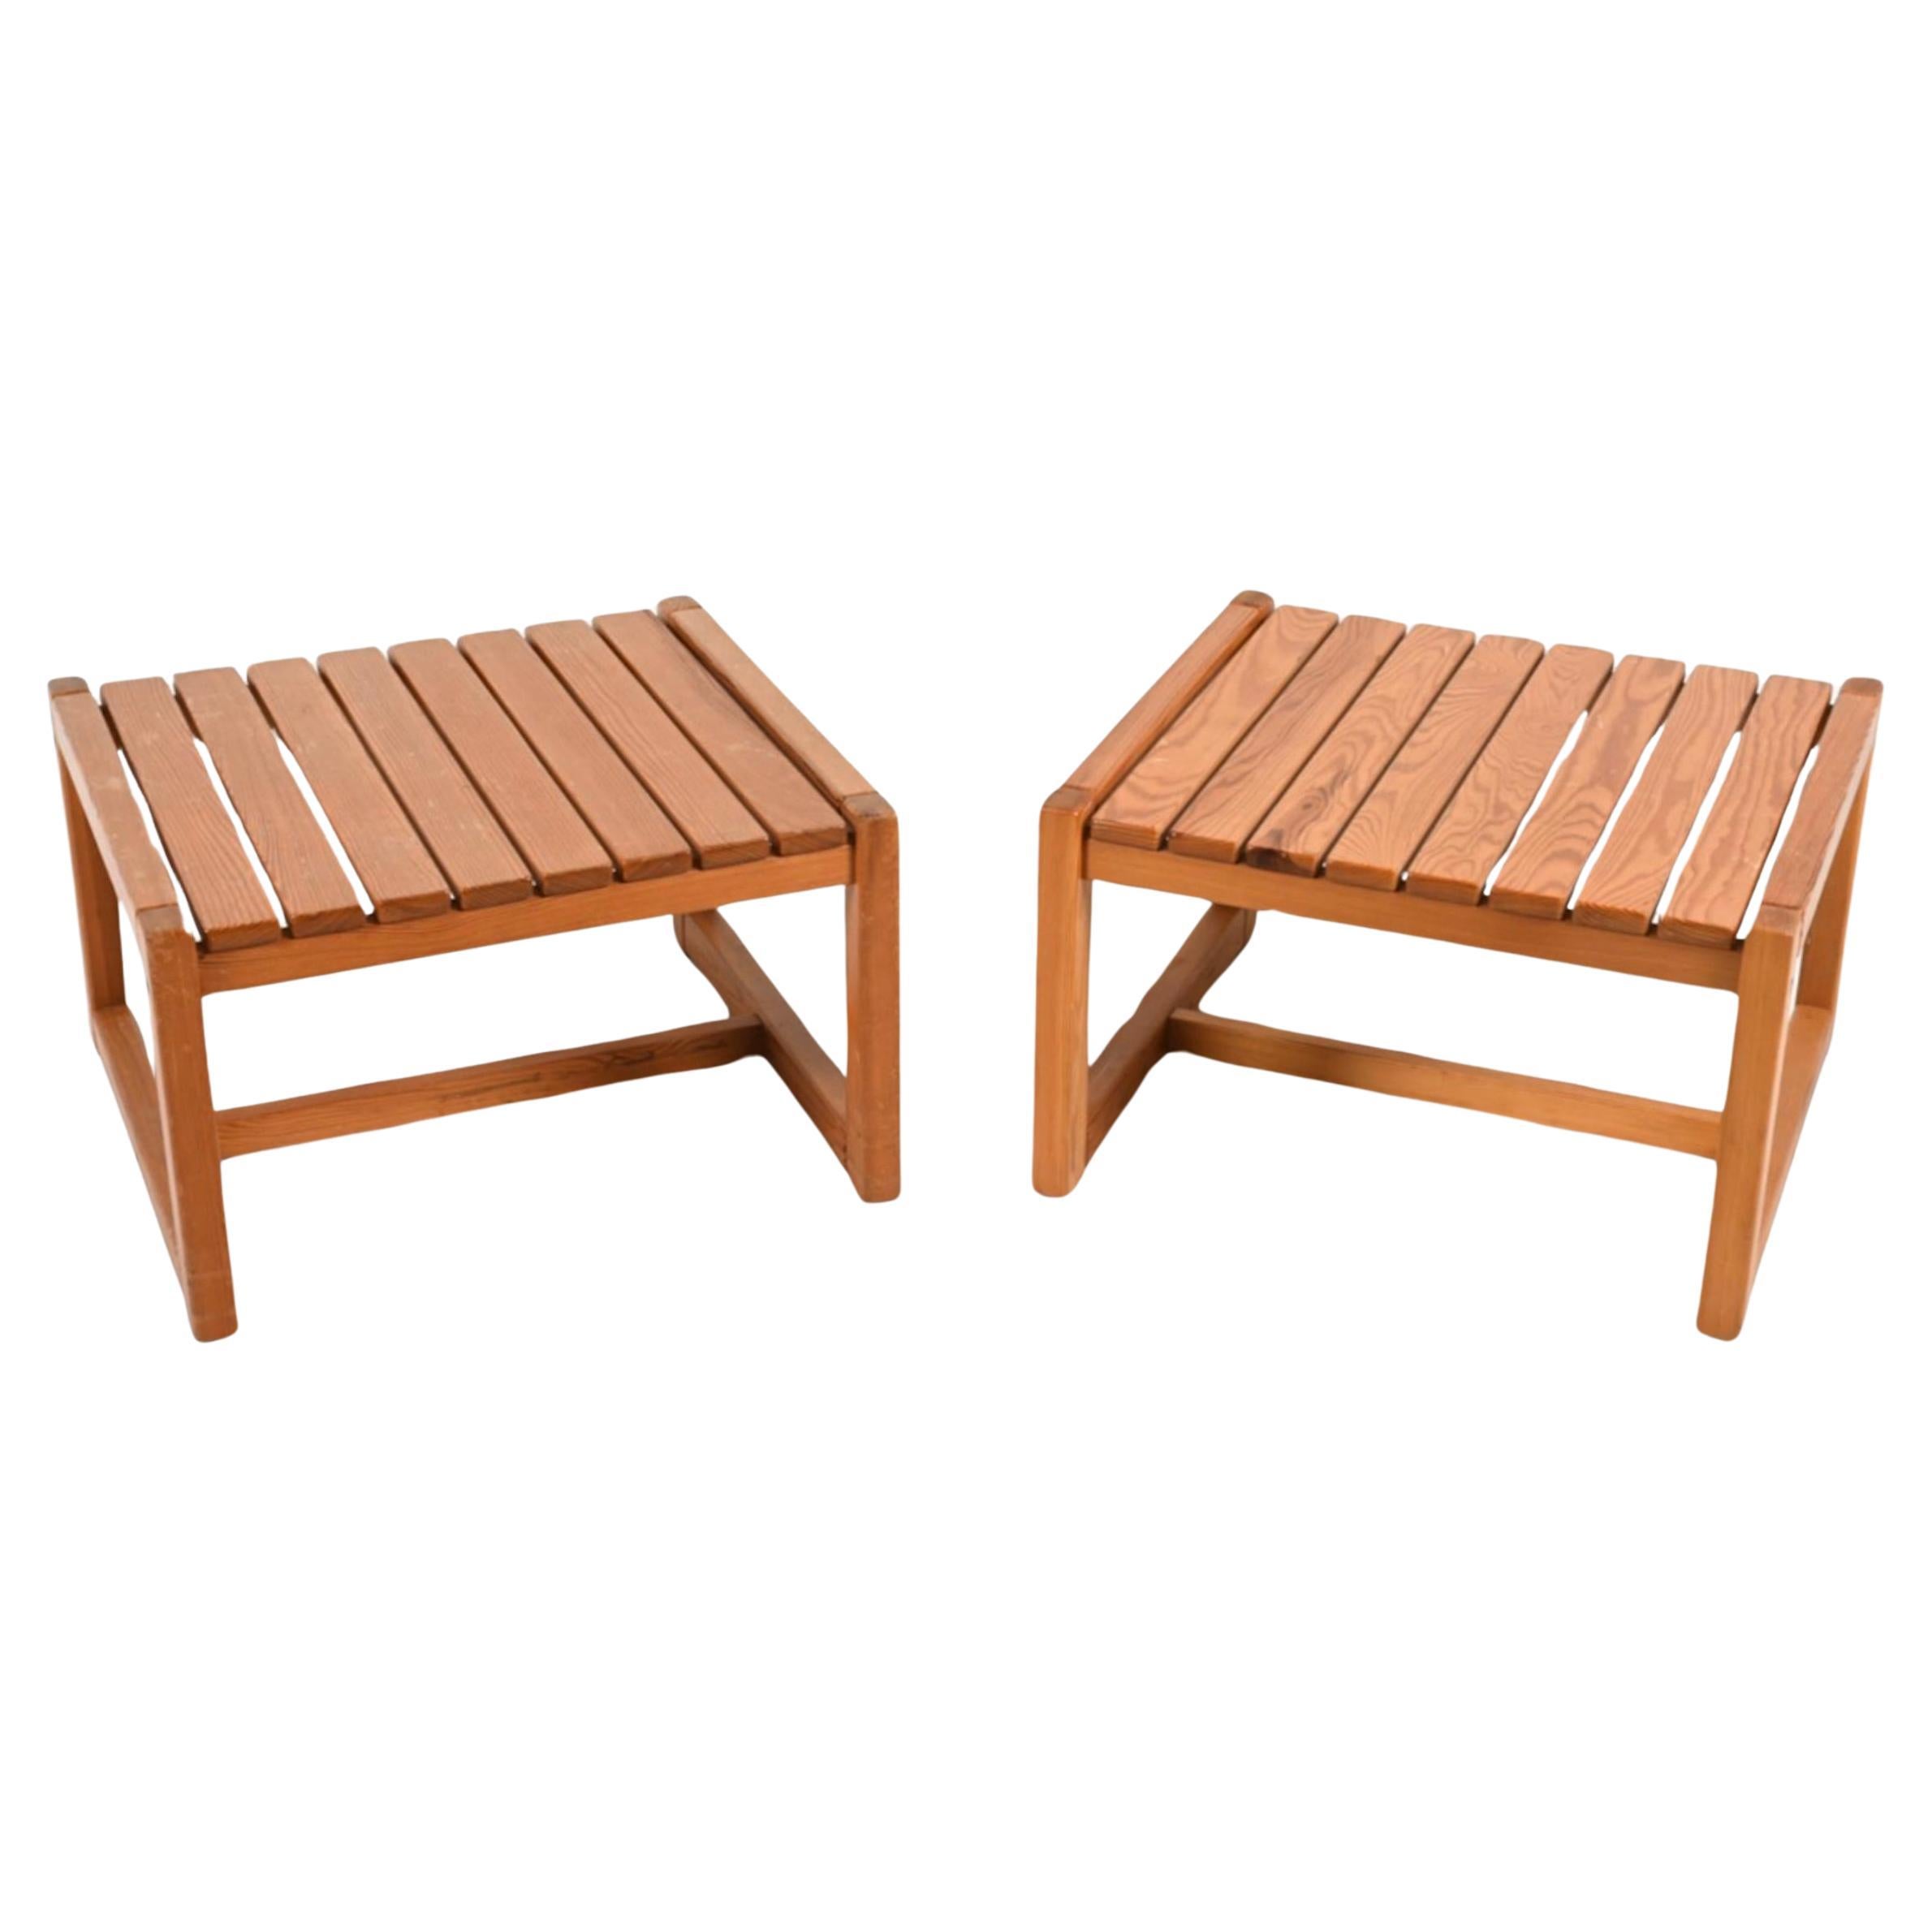 Pair of Dutch Modern low End side tables or Nightstands in solid slatted pine